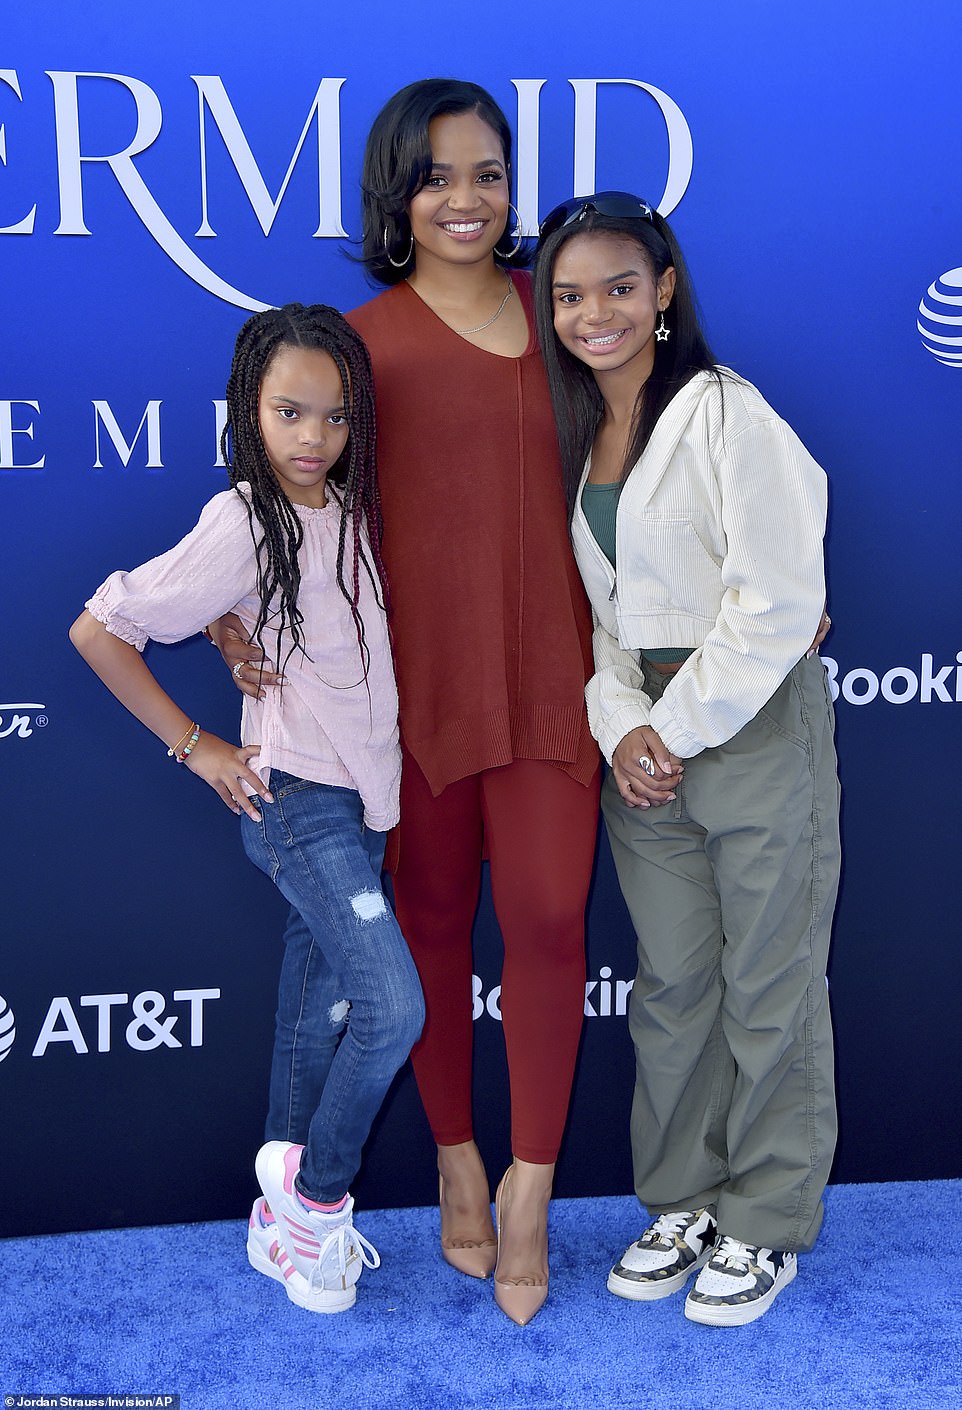 Kyla Pratt brought her two daughters along for the fun-filled premiere